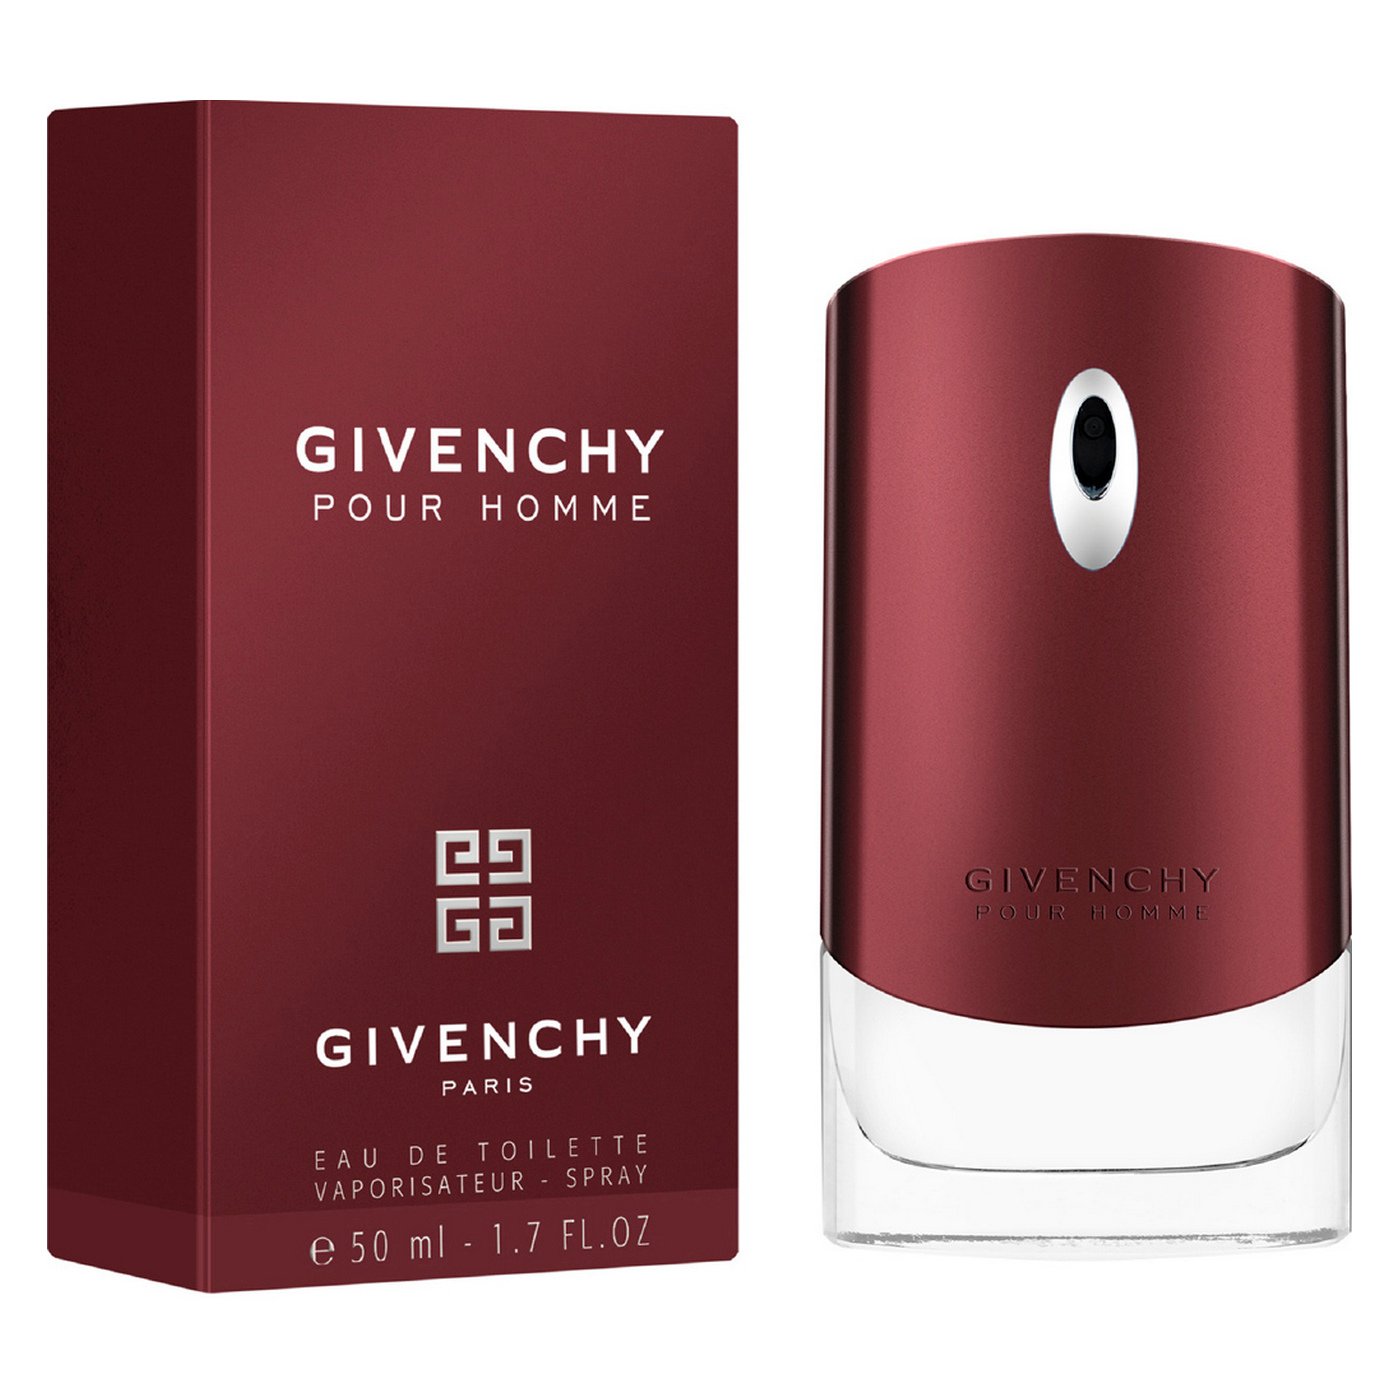 Givenchy pour homme оригинал. Givenchy pour homme EDT. Givenchy Givenchy / Givenchy pour homme . 100 Мл. Оригинал Givenchy -Givenchy pour homme 100ml. Givenchy. Туалетная вода pour homme, 50 мл.